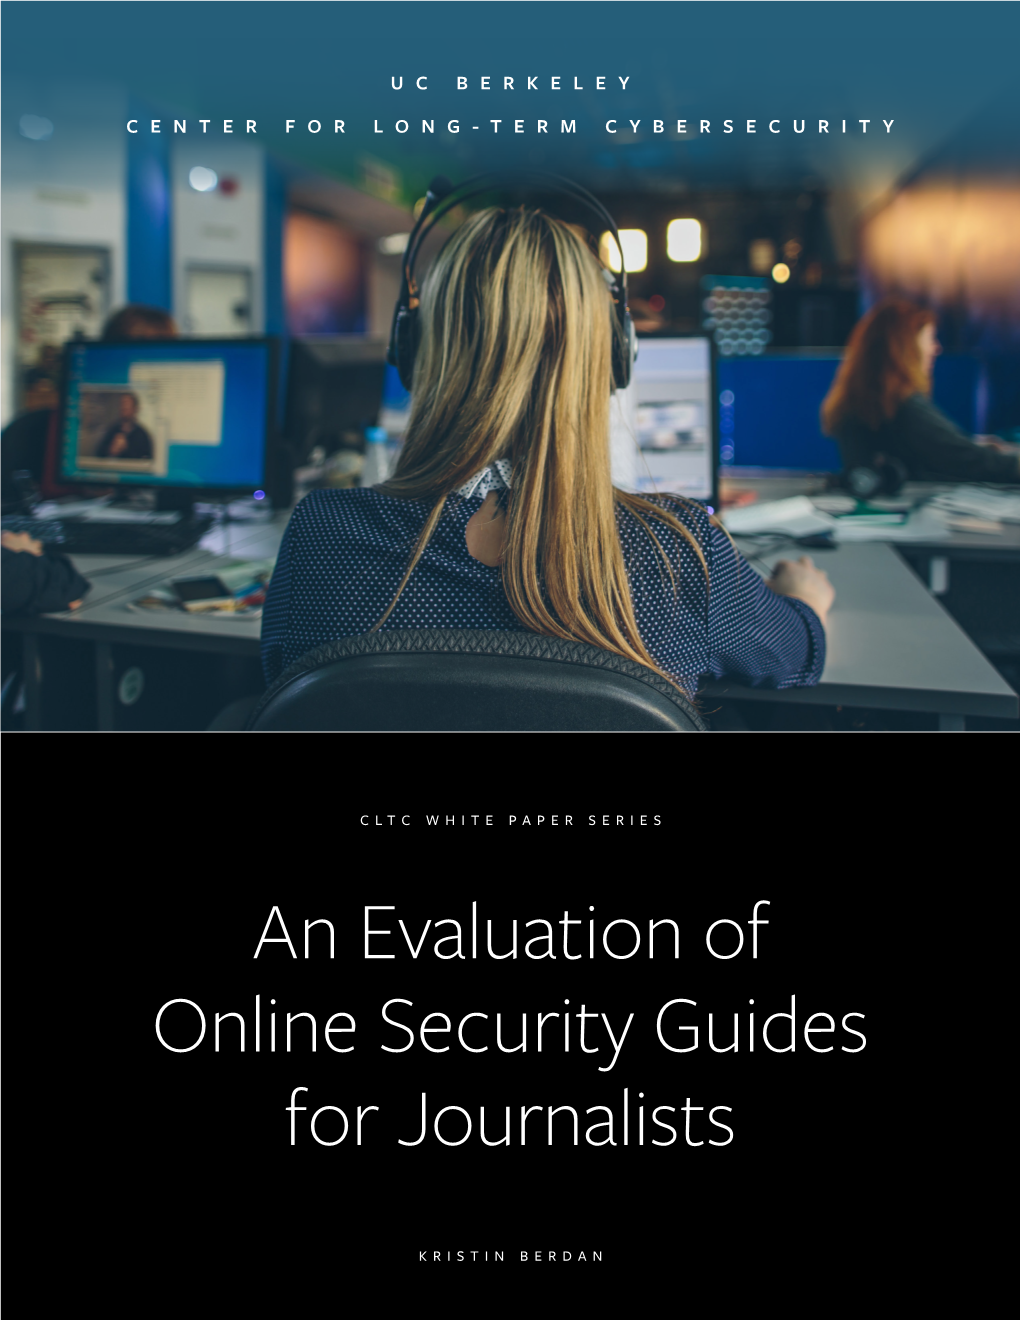 An Evaluation of Online Security Guides for Journalists